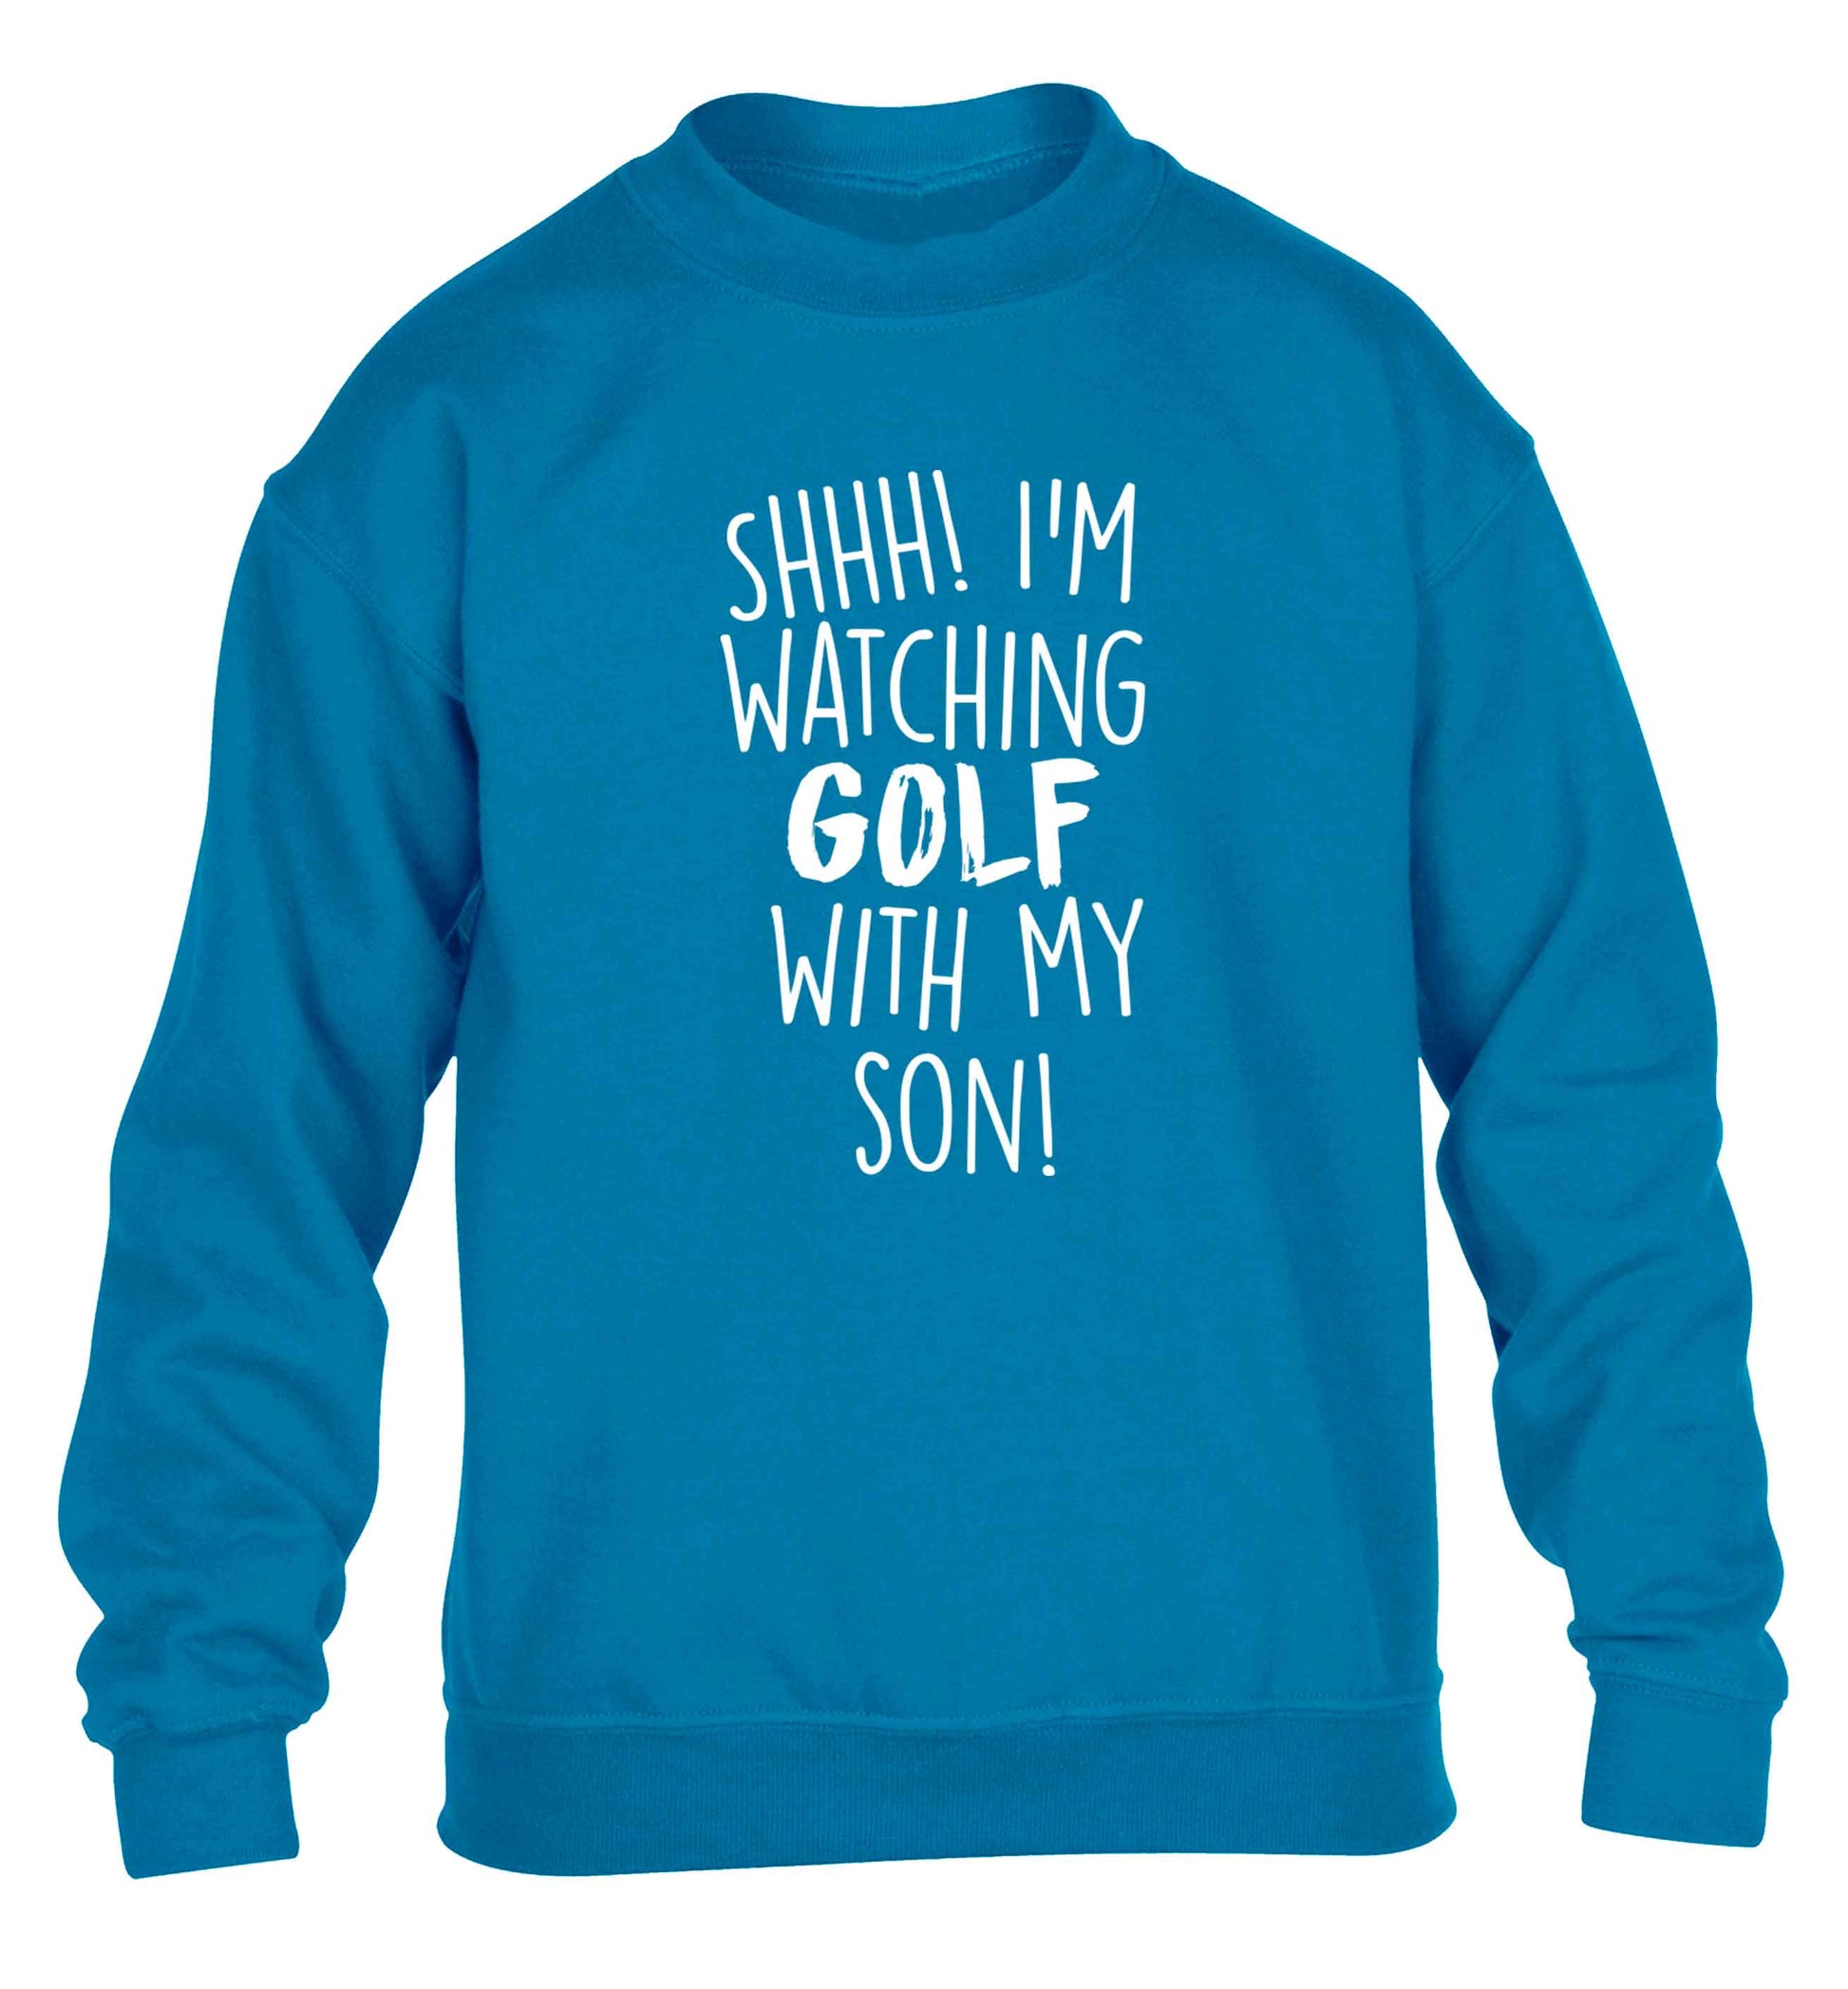 Shh I'm watching golf with my son children's blue sweater 12-13 Years